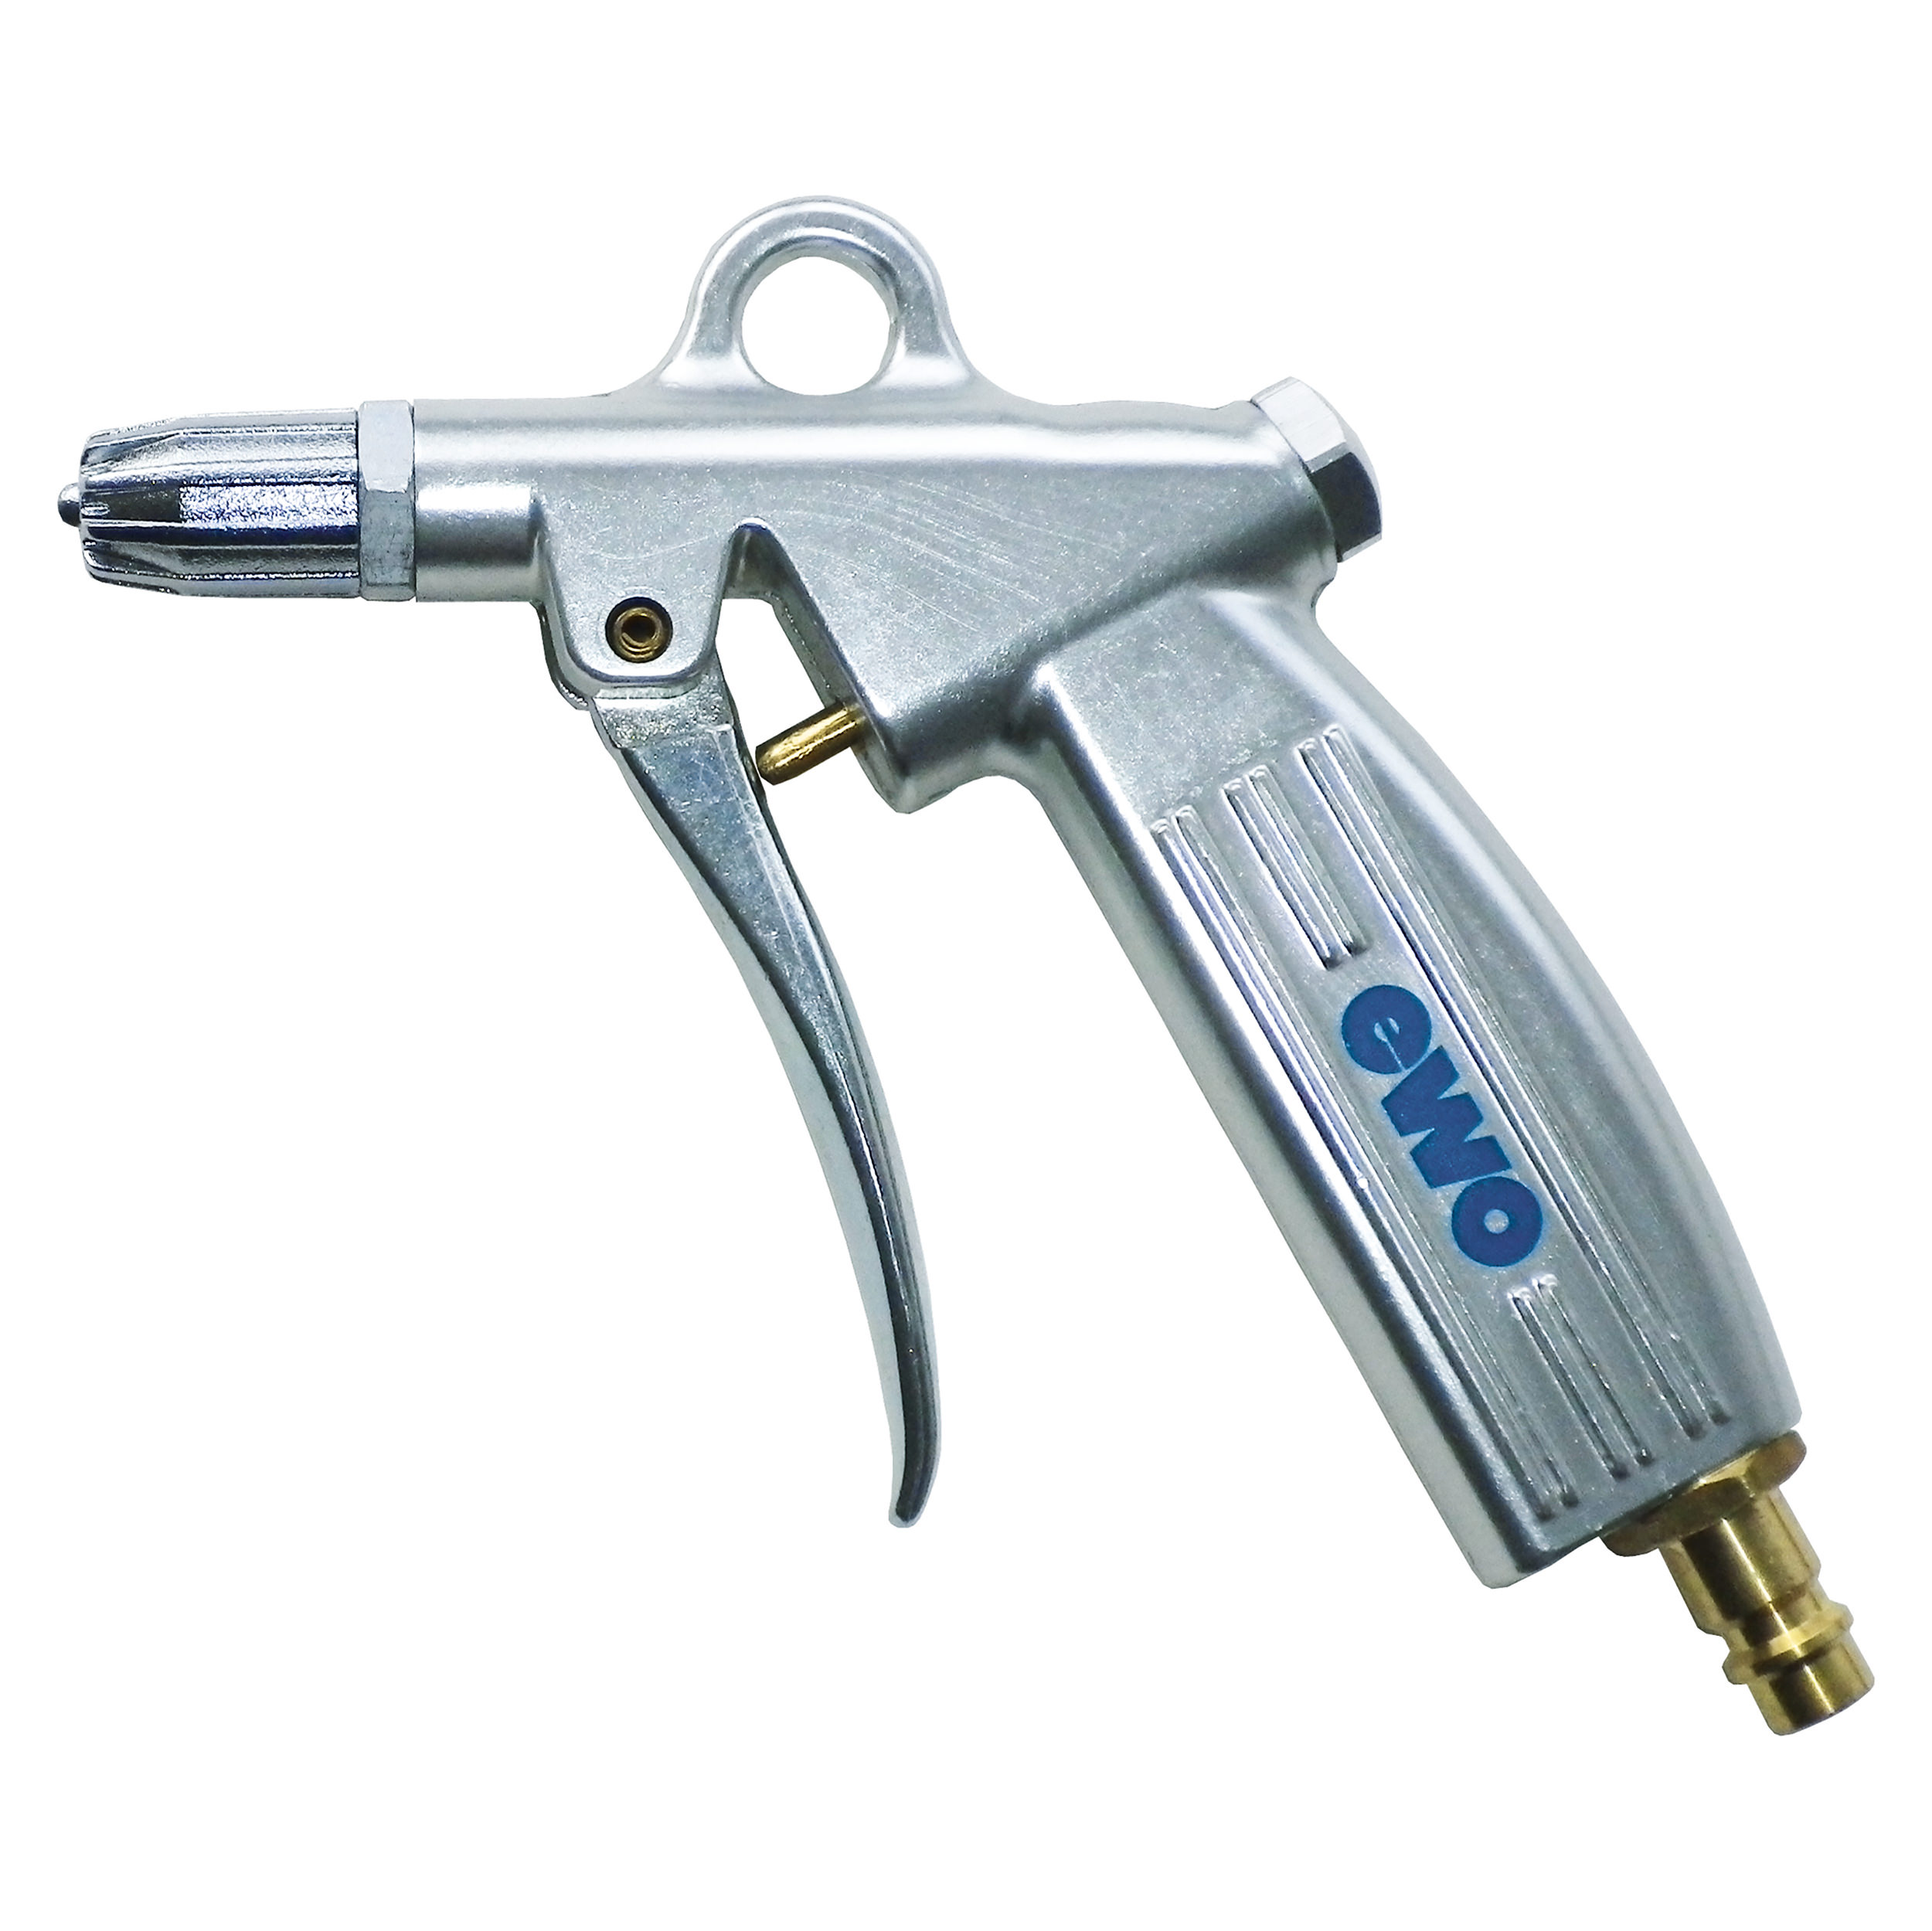 Blow gun, aluminium, forged, clear anodised, safety nozzle blowstar: metal design, 2-part nozzle; G¼ female